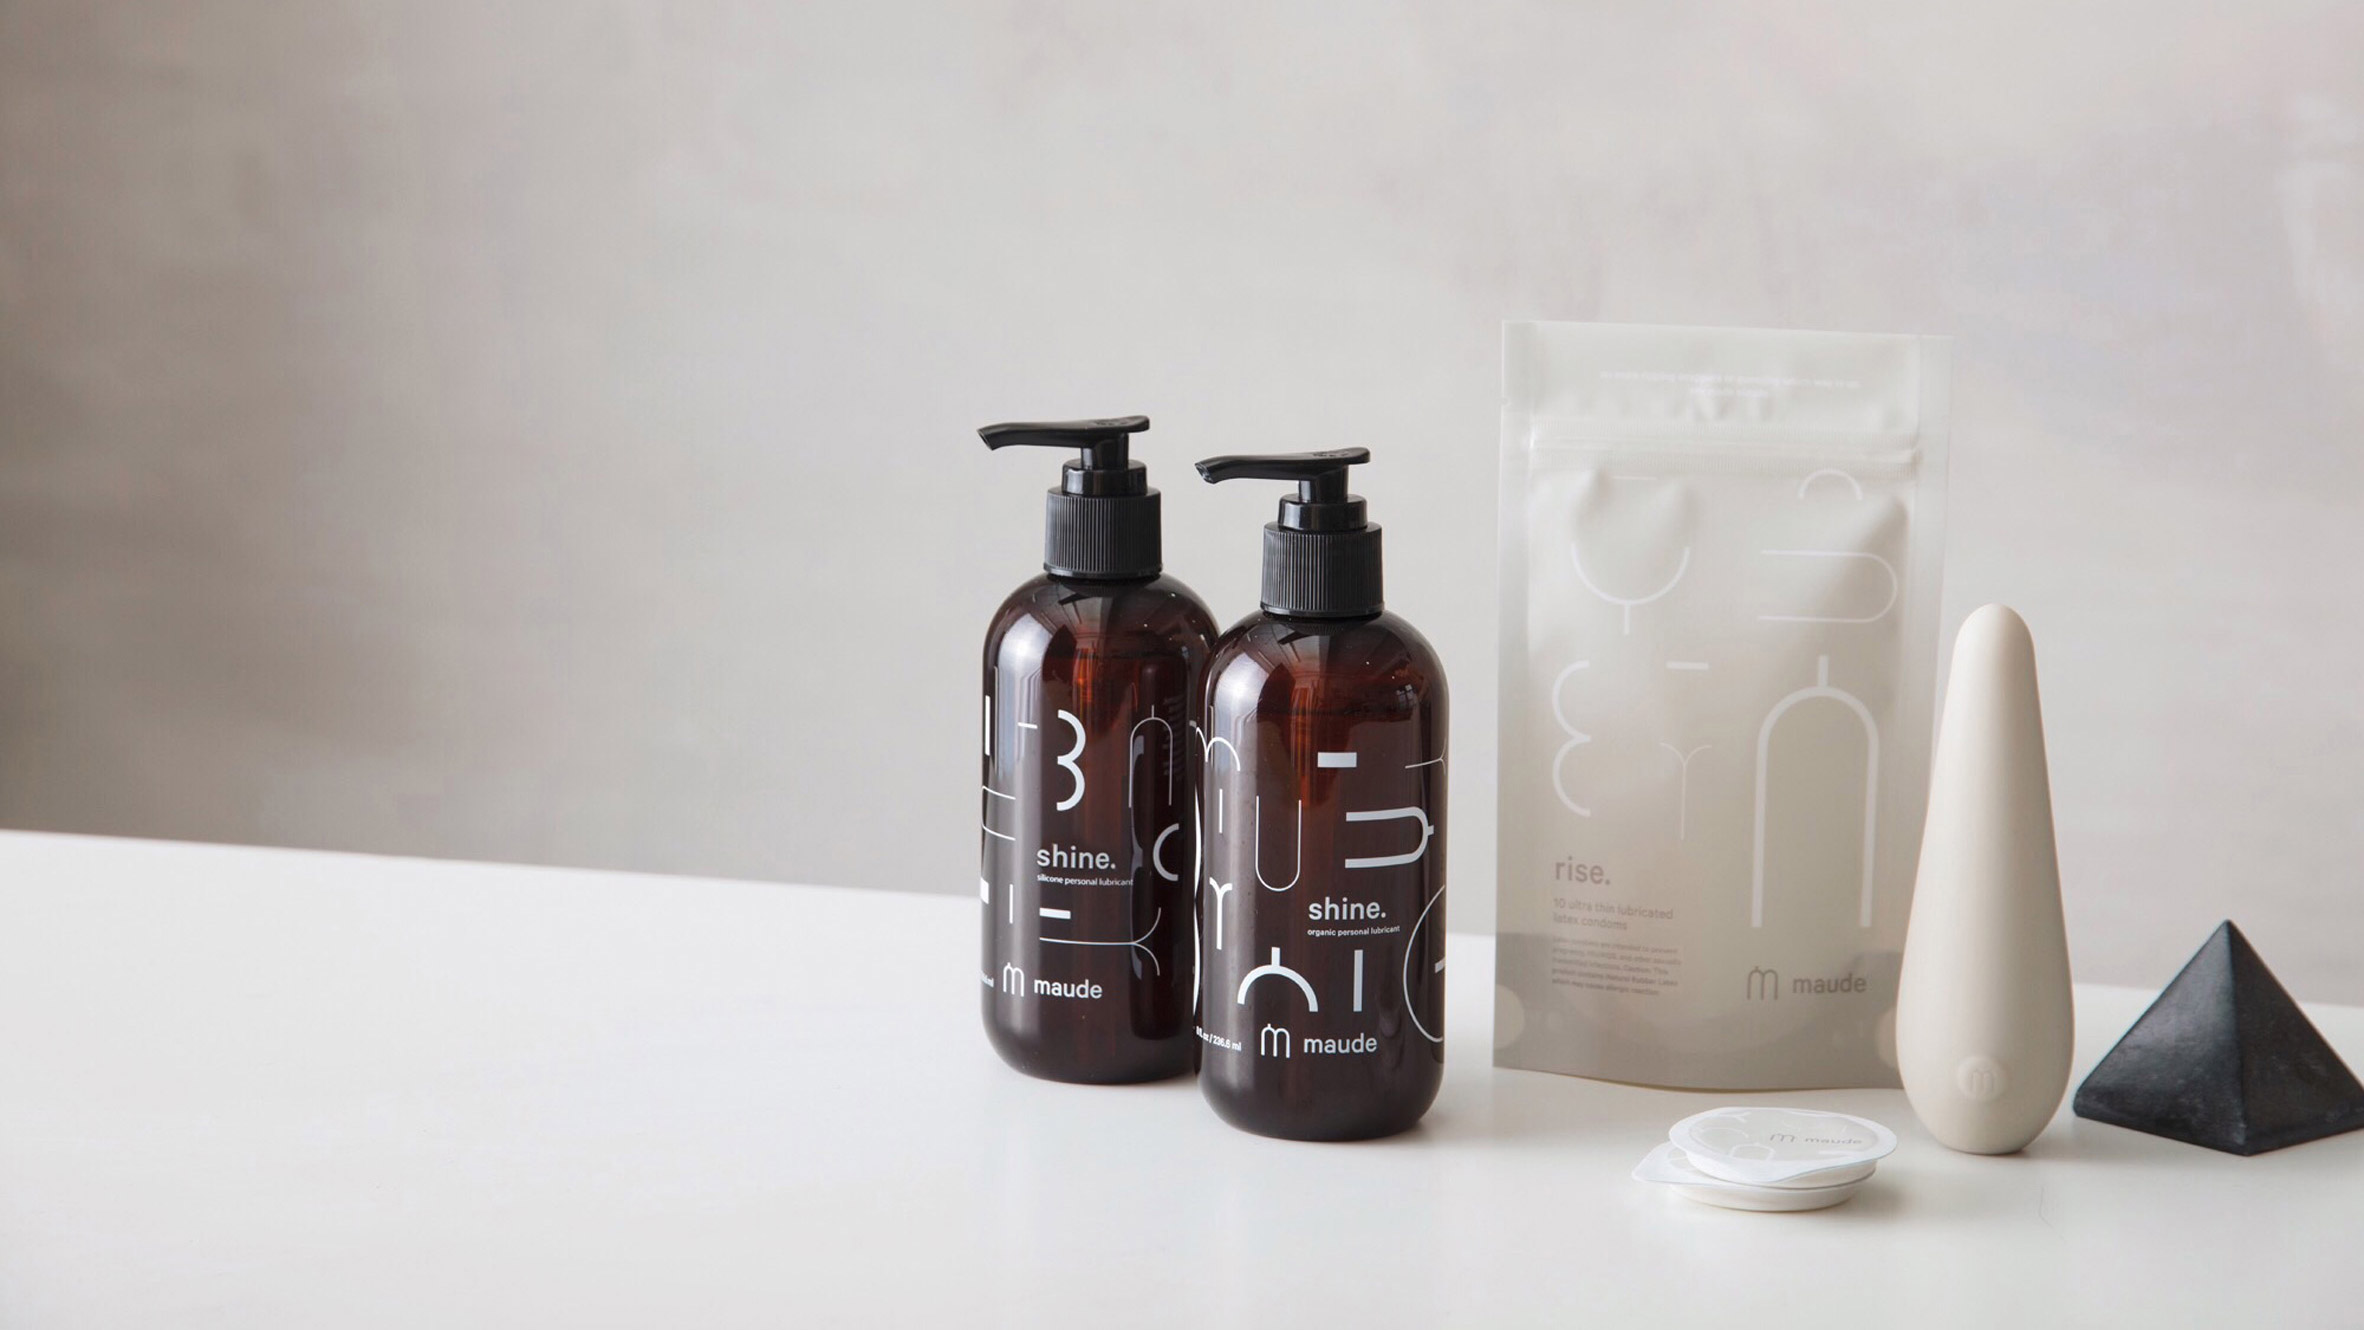 Maude has created a range of gender-neutral sex products with a minimalist ...